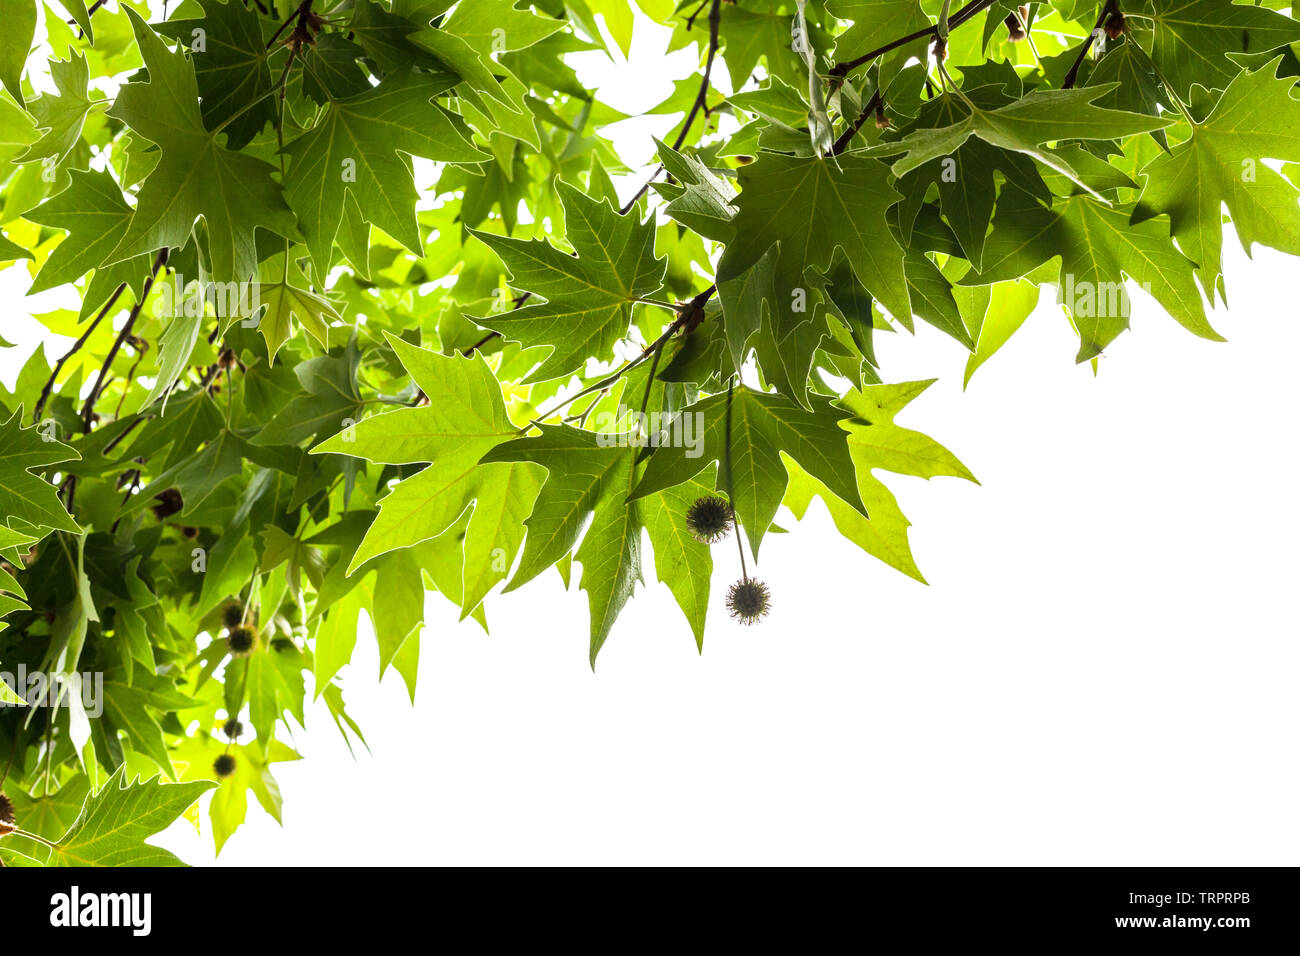 Green leaves and fruits of a London plane tree isolated on white background Stock Photo